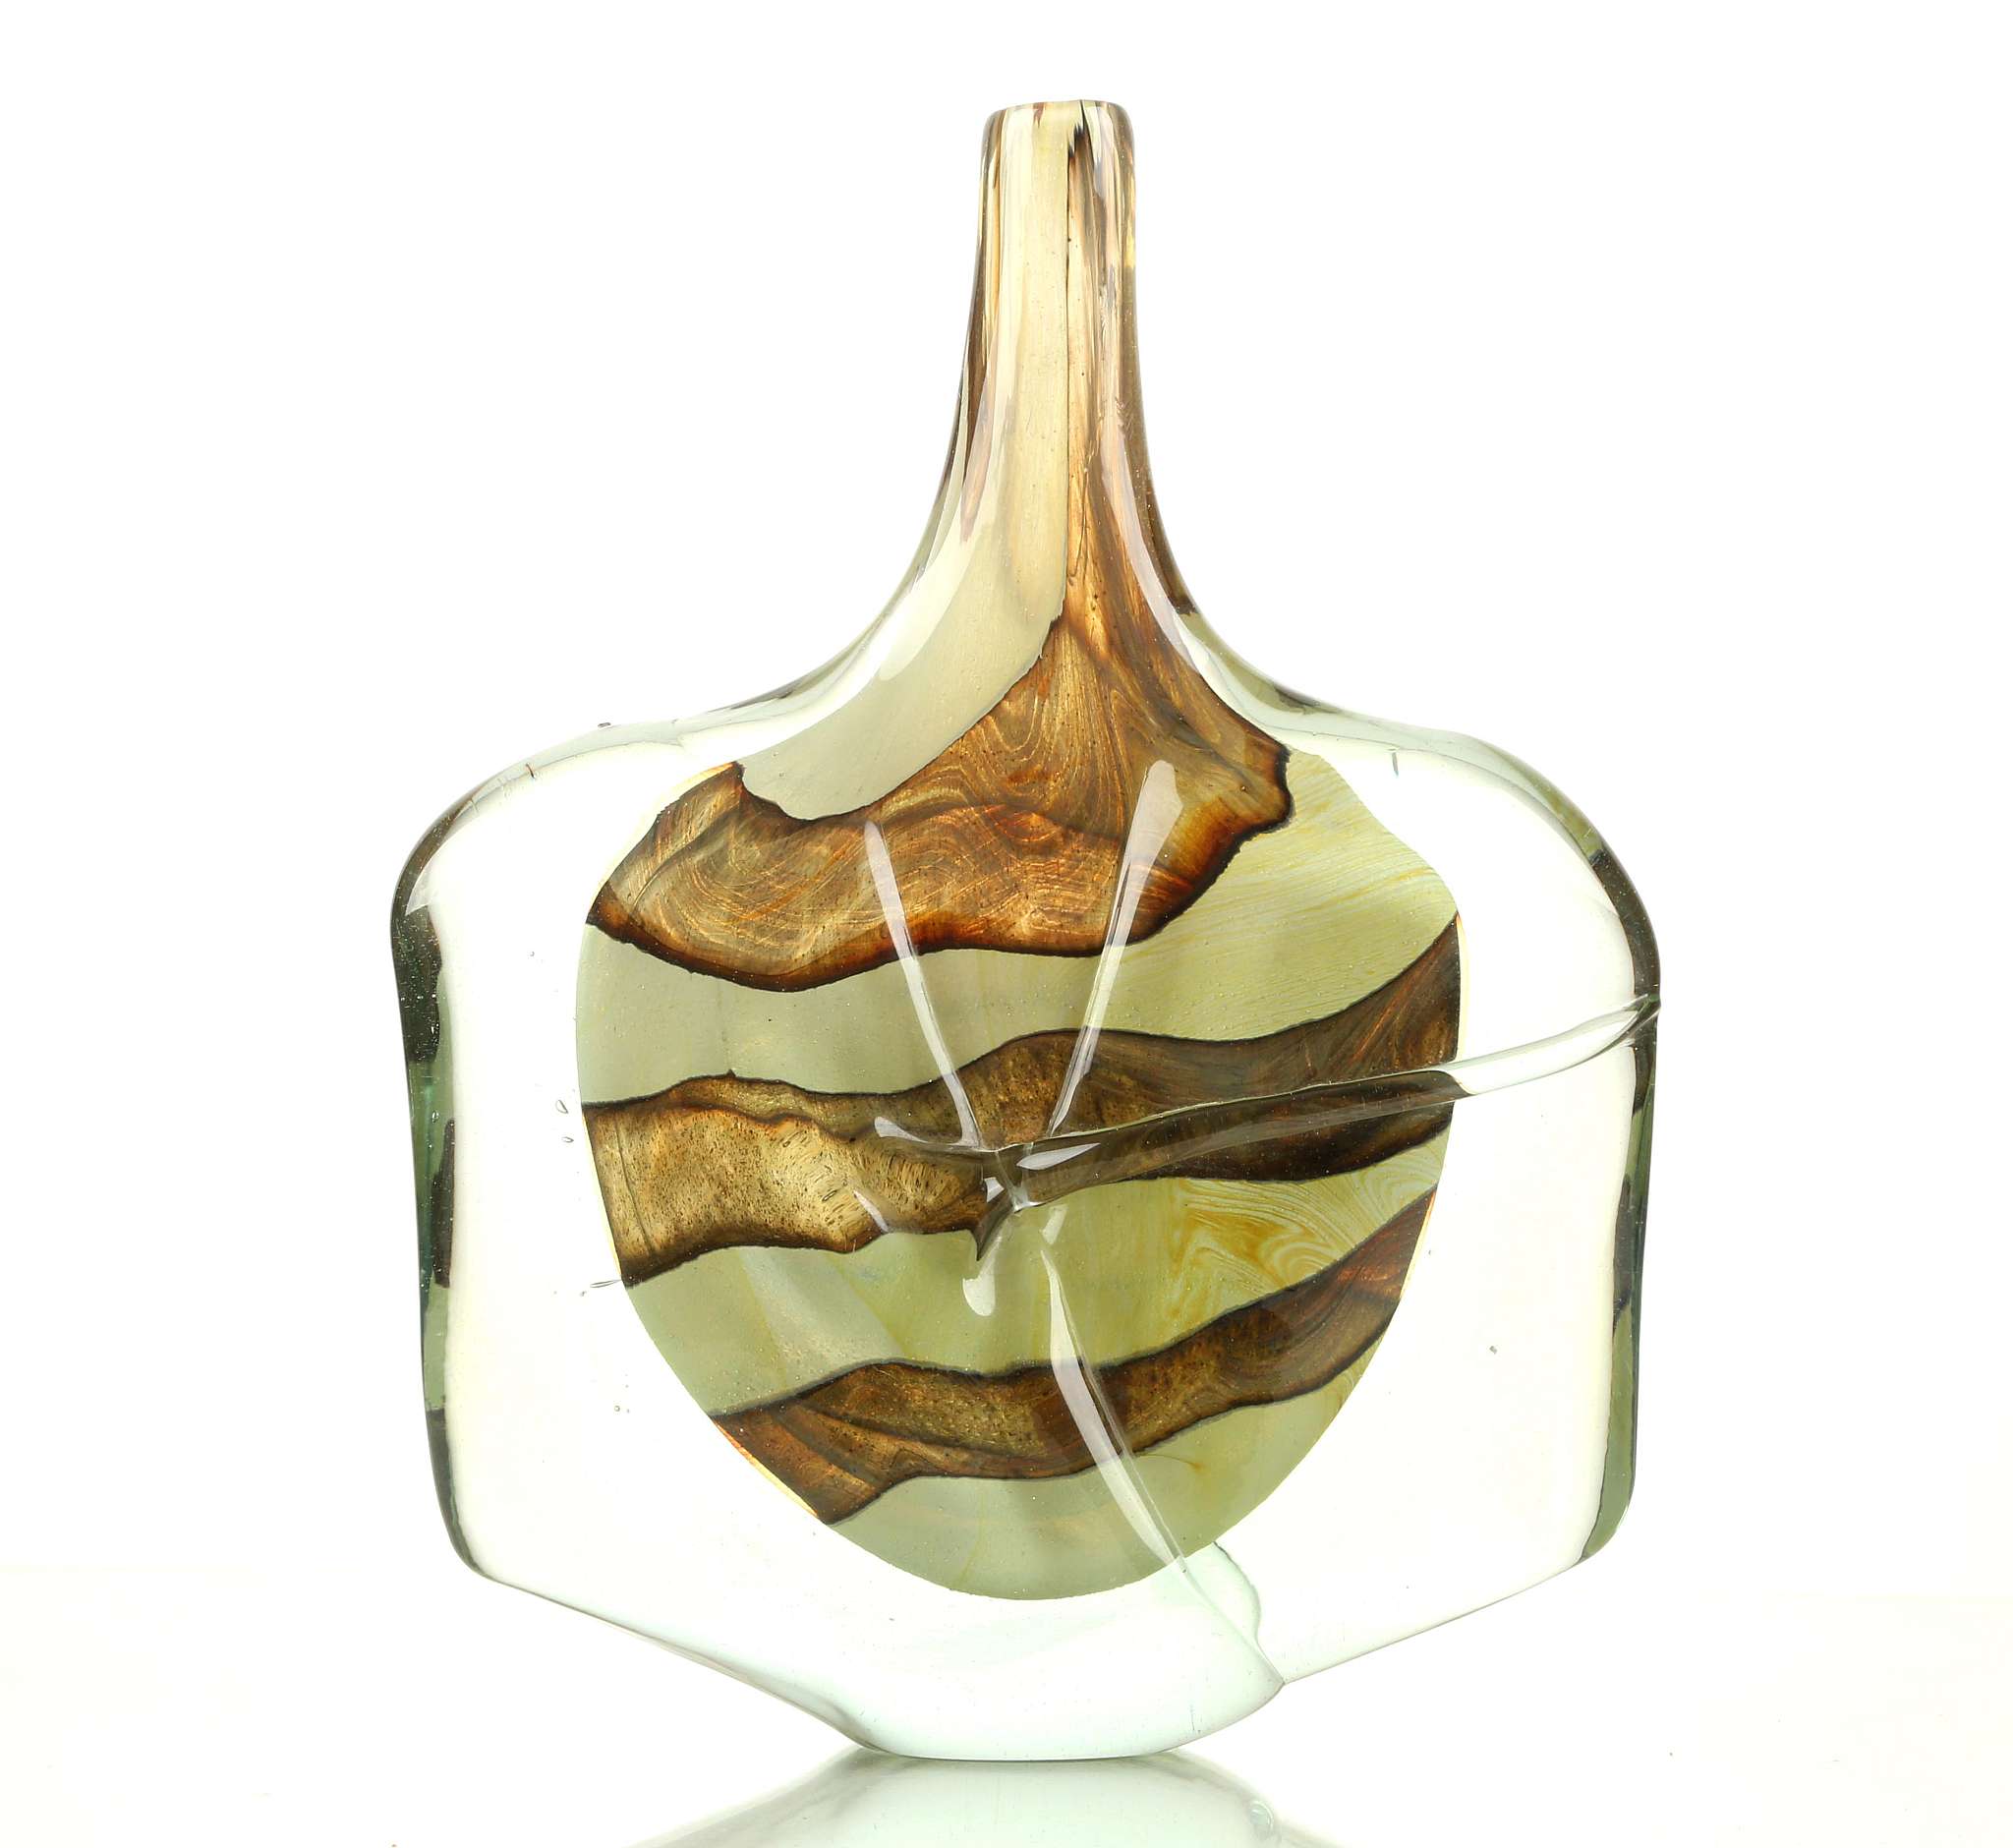 A MDINA FISH VASE, mid 20th century, green and brown clear cased glass, (21 x 27cm high)